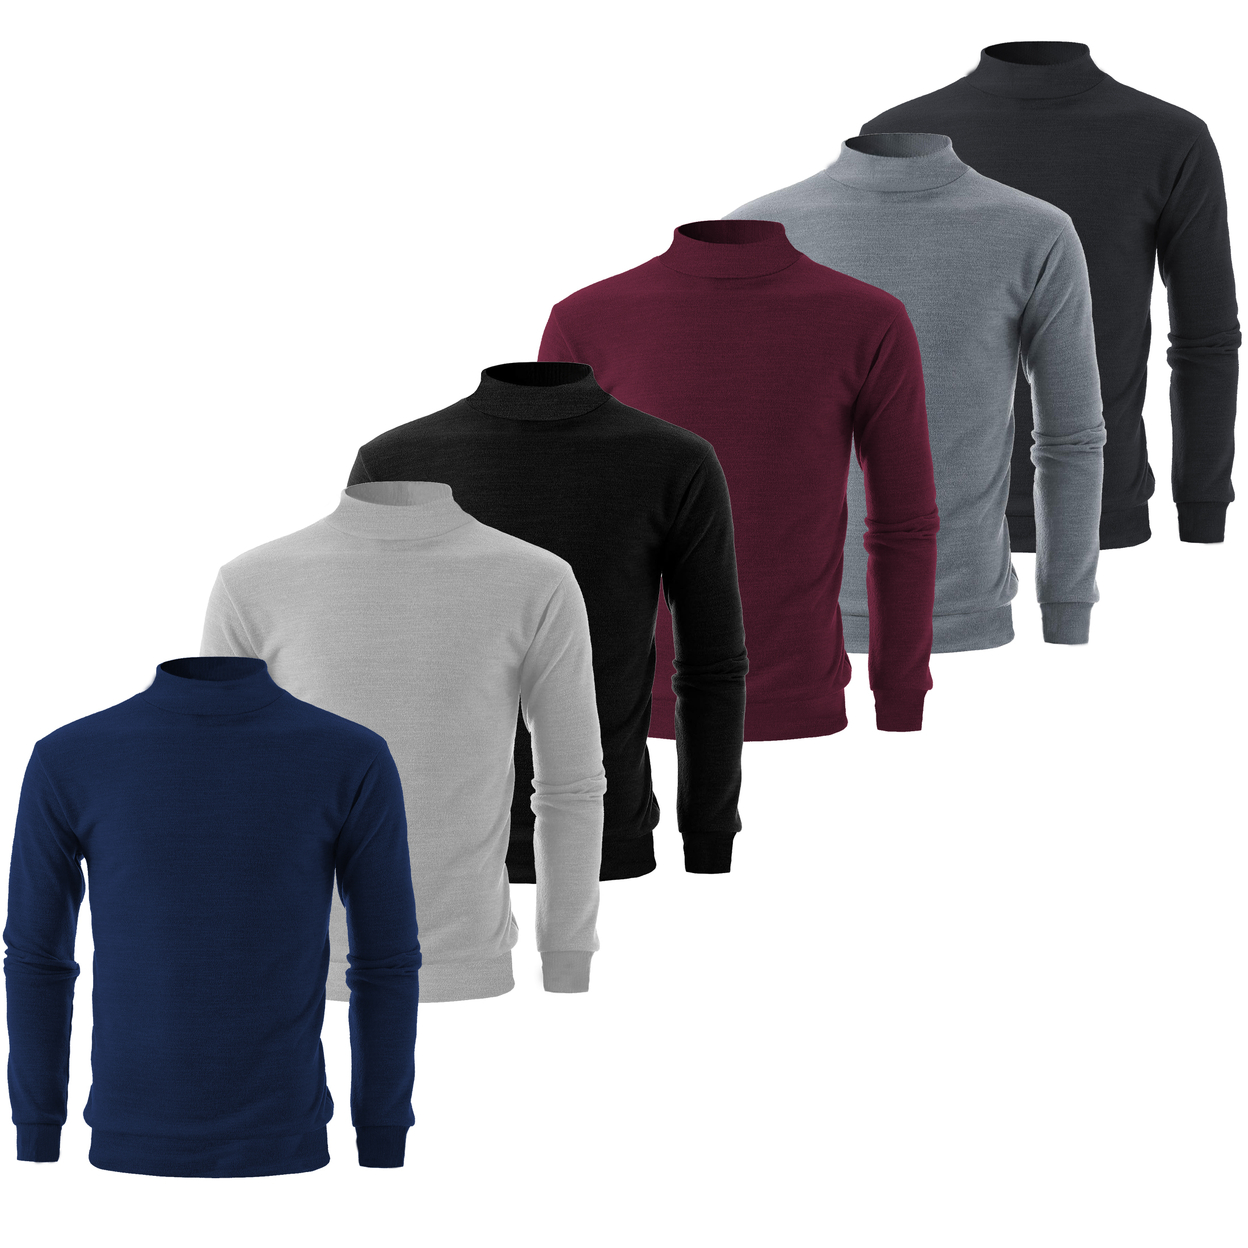 Multi-Pack: Men's Winter Warm Cozy Knit Slim Fit Mock Neck Sweater - 2-pack, Small